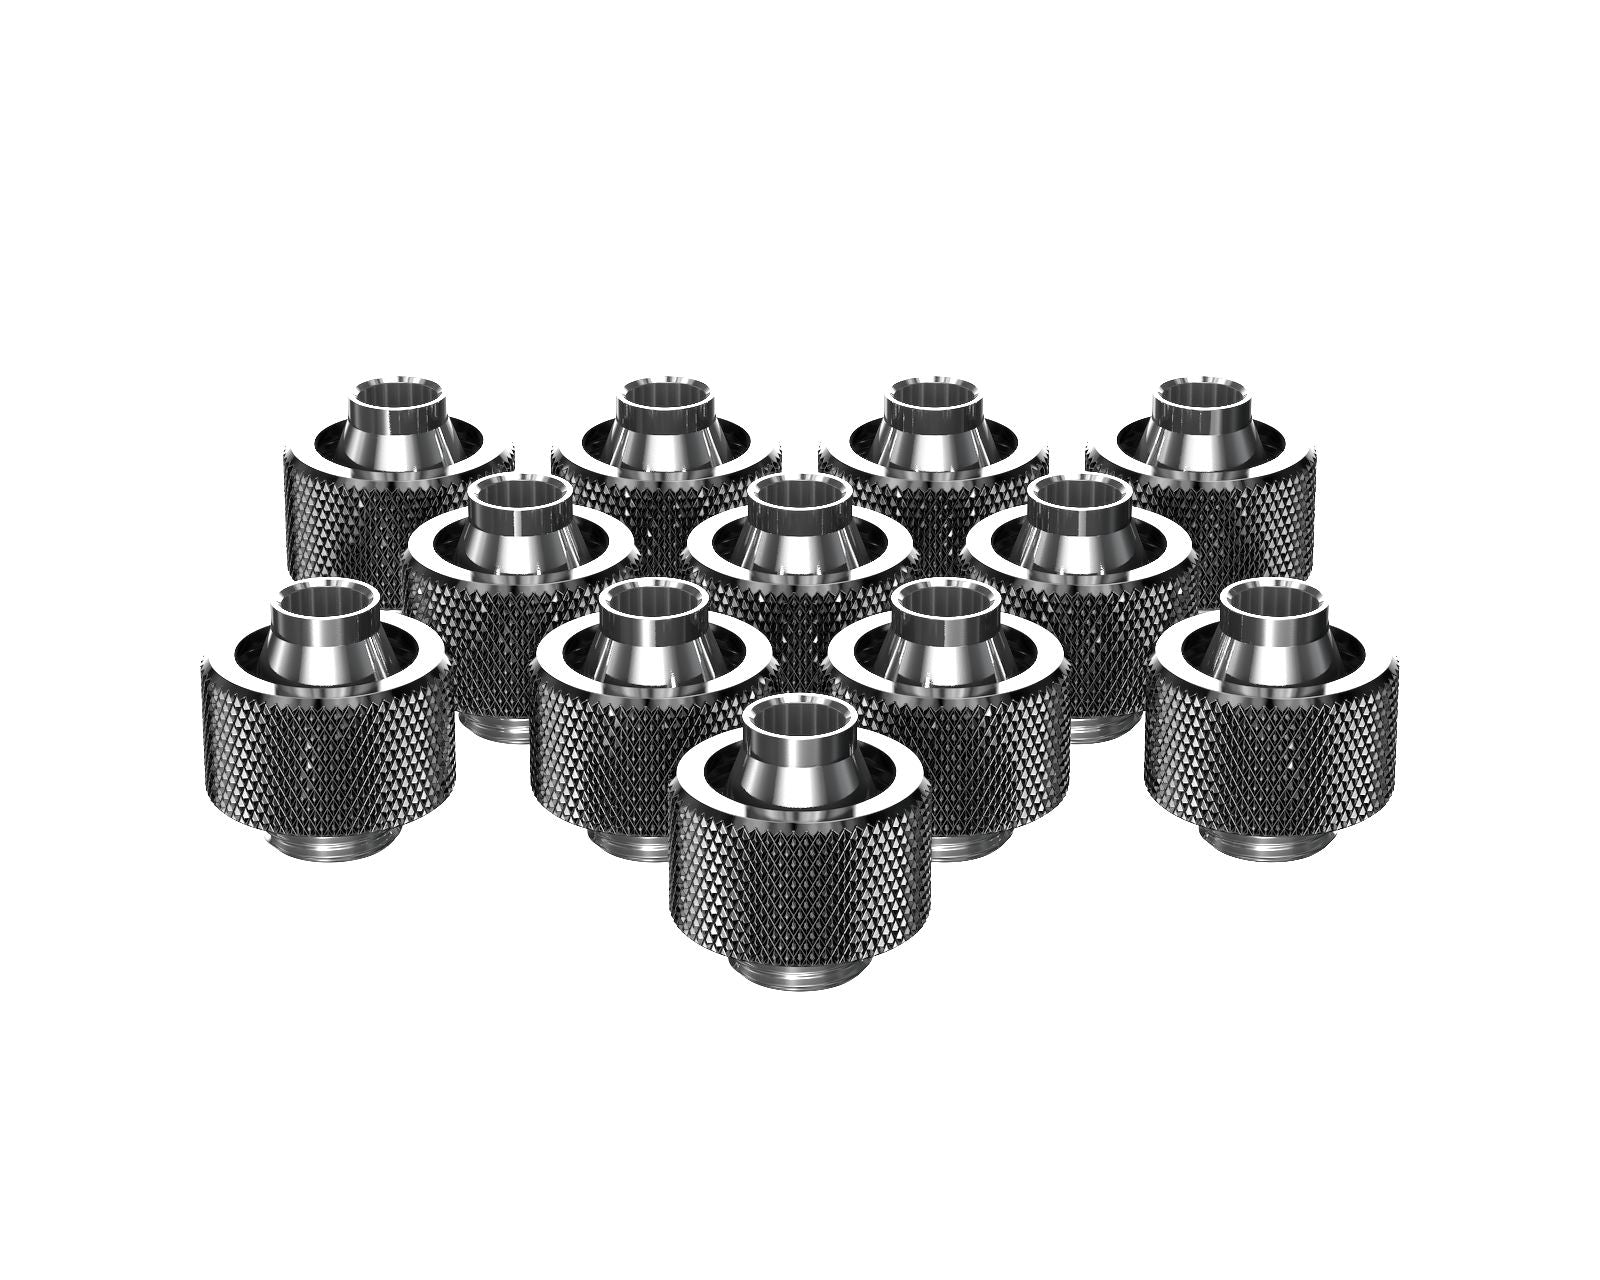 PrimoChill SecureFit SX - Premium Compression Fitting For 7/16in ID x 5/8in OD Flexible Tubing 12 Pack (F-SFSX758-12) - Available in 20+ Colors, Custom Watercooling Loop Ready - Dark Nickel